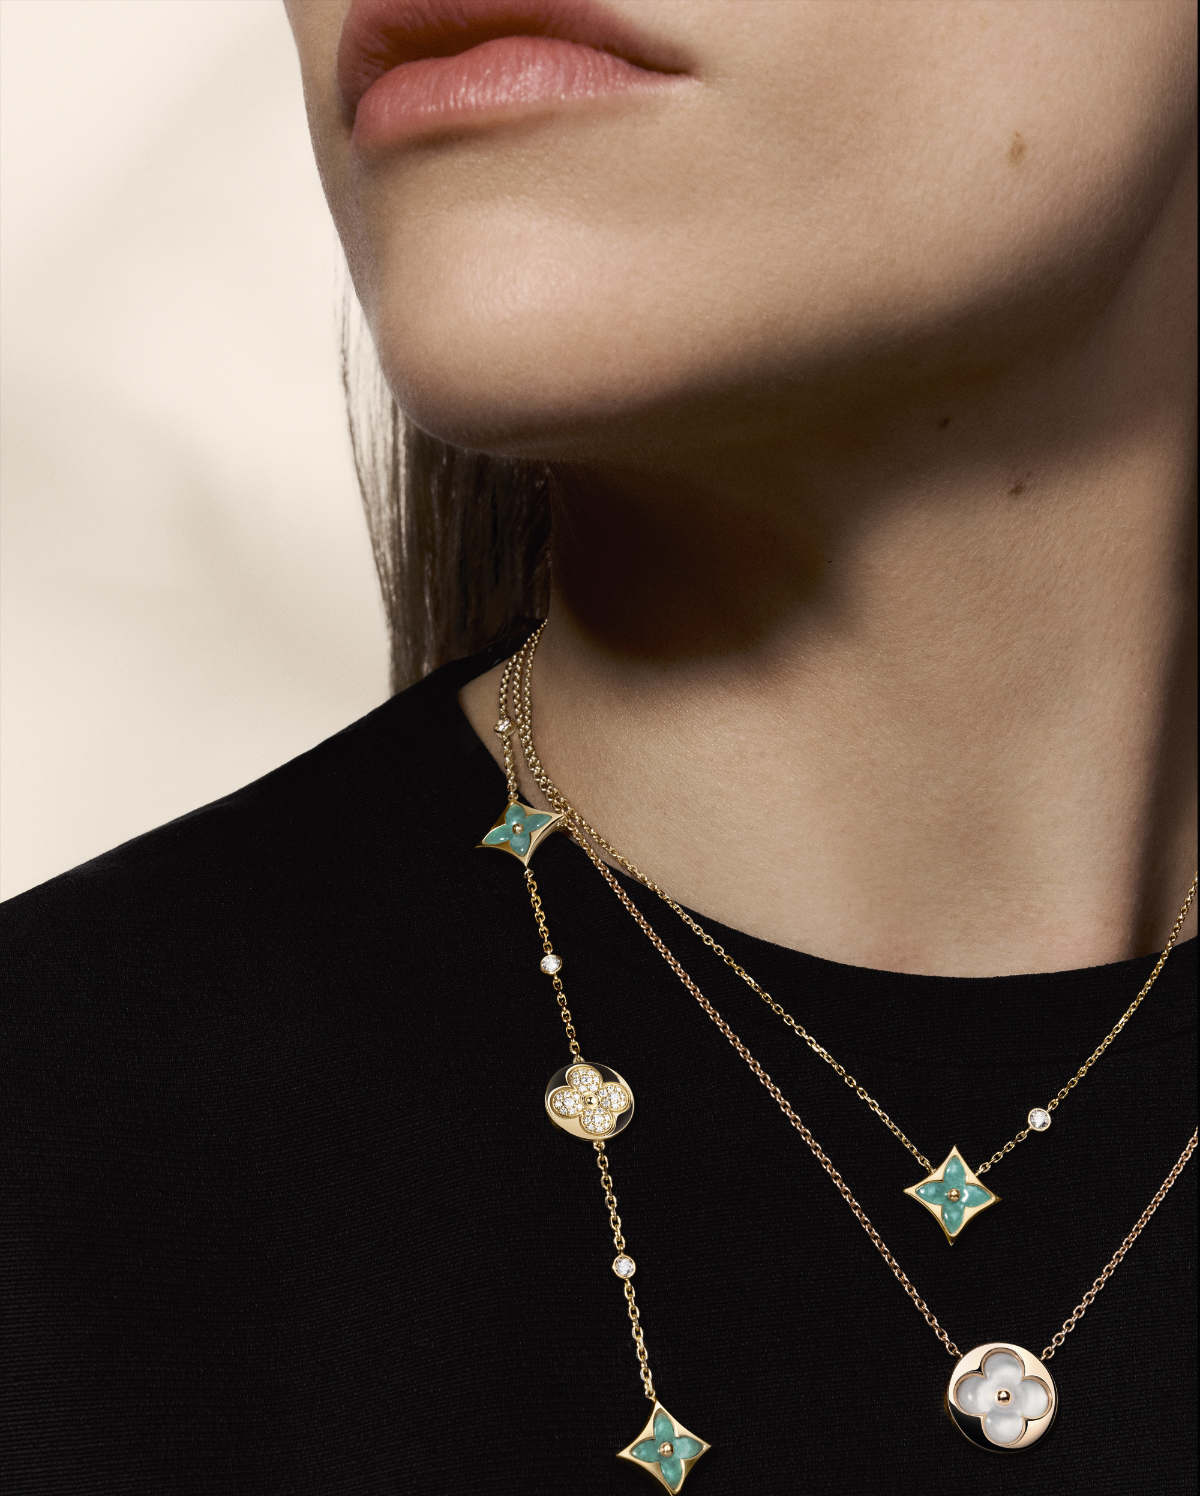 Amazonite, A Novel New Ornamental Stone In The Louis Vuitton Color Blossom Collection